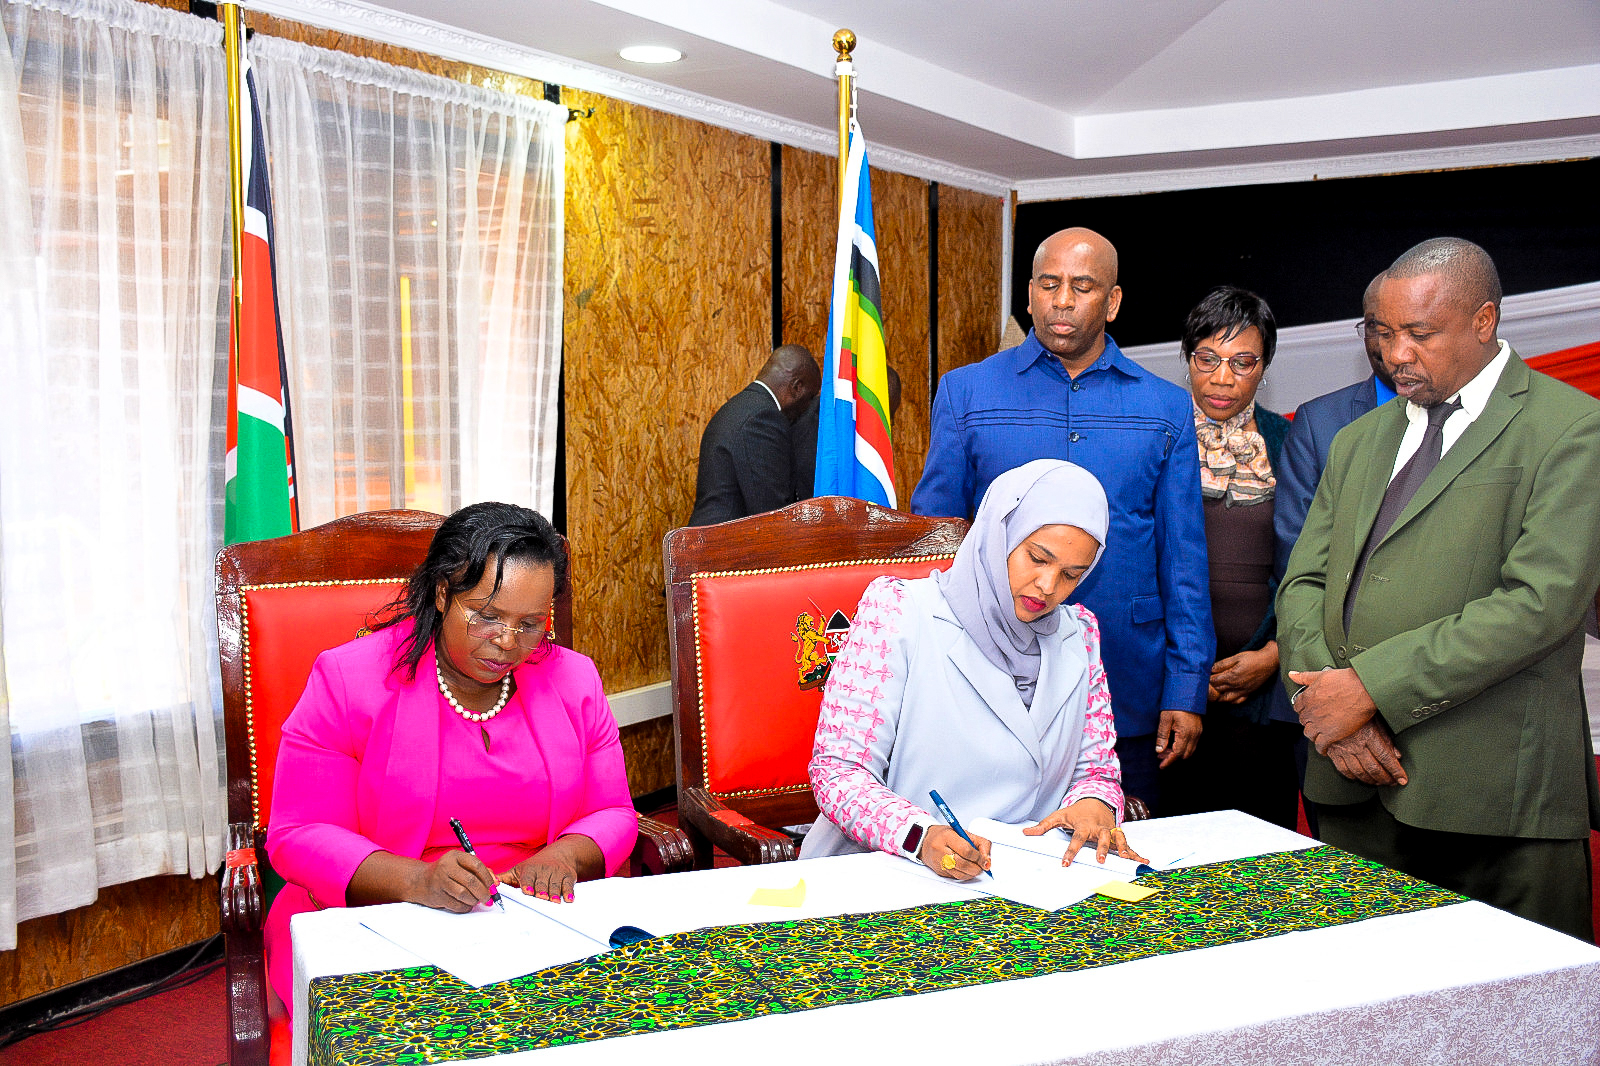 The Cabinet Secretary, Hon. Peninah Malonza, signing the performance contract for the financial year 2023/2024 with the Principal Secretary State Department for Culture and Heritage, Ms. Ummi Bashir.